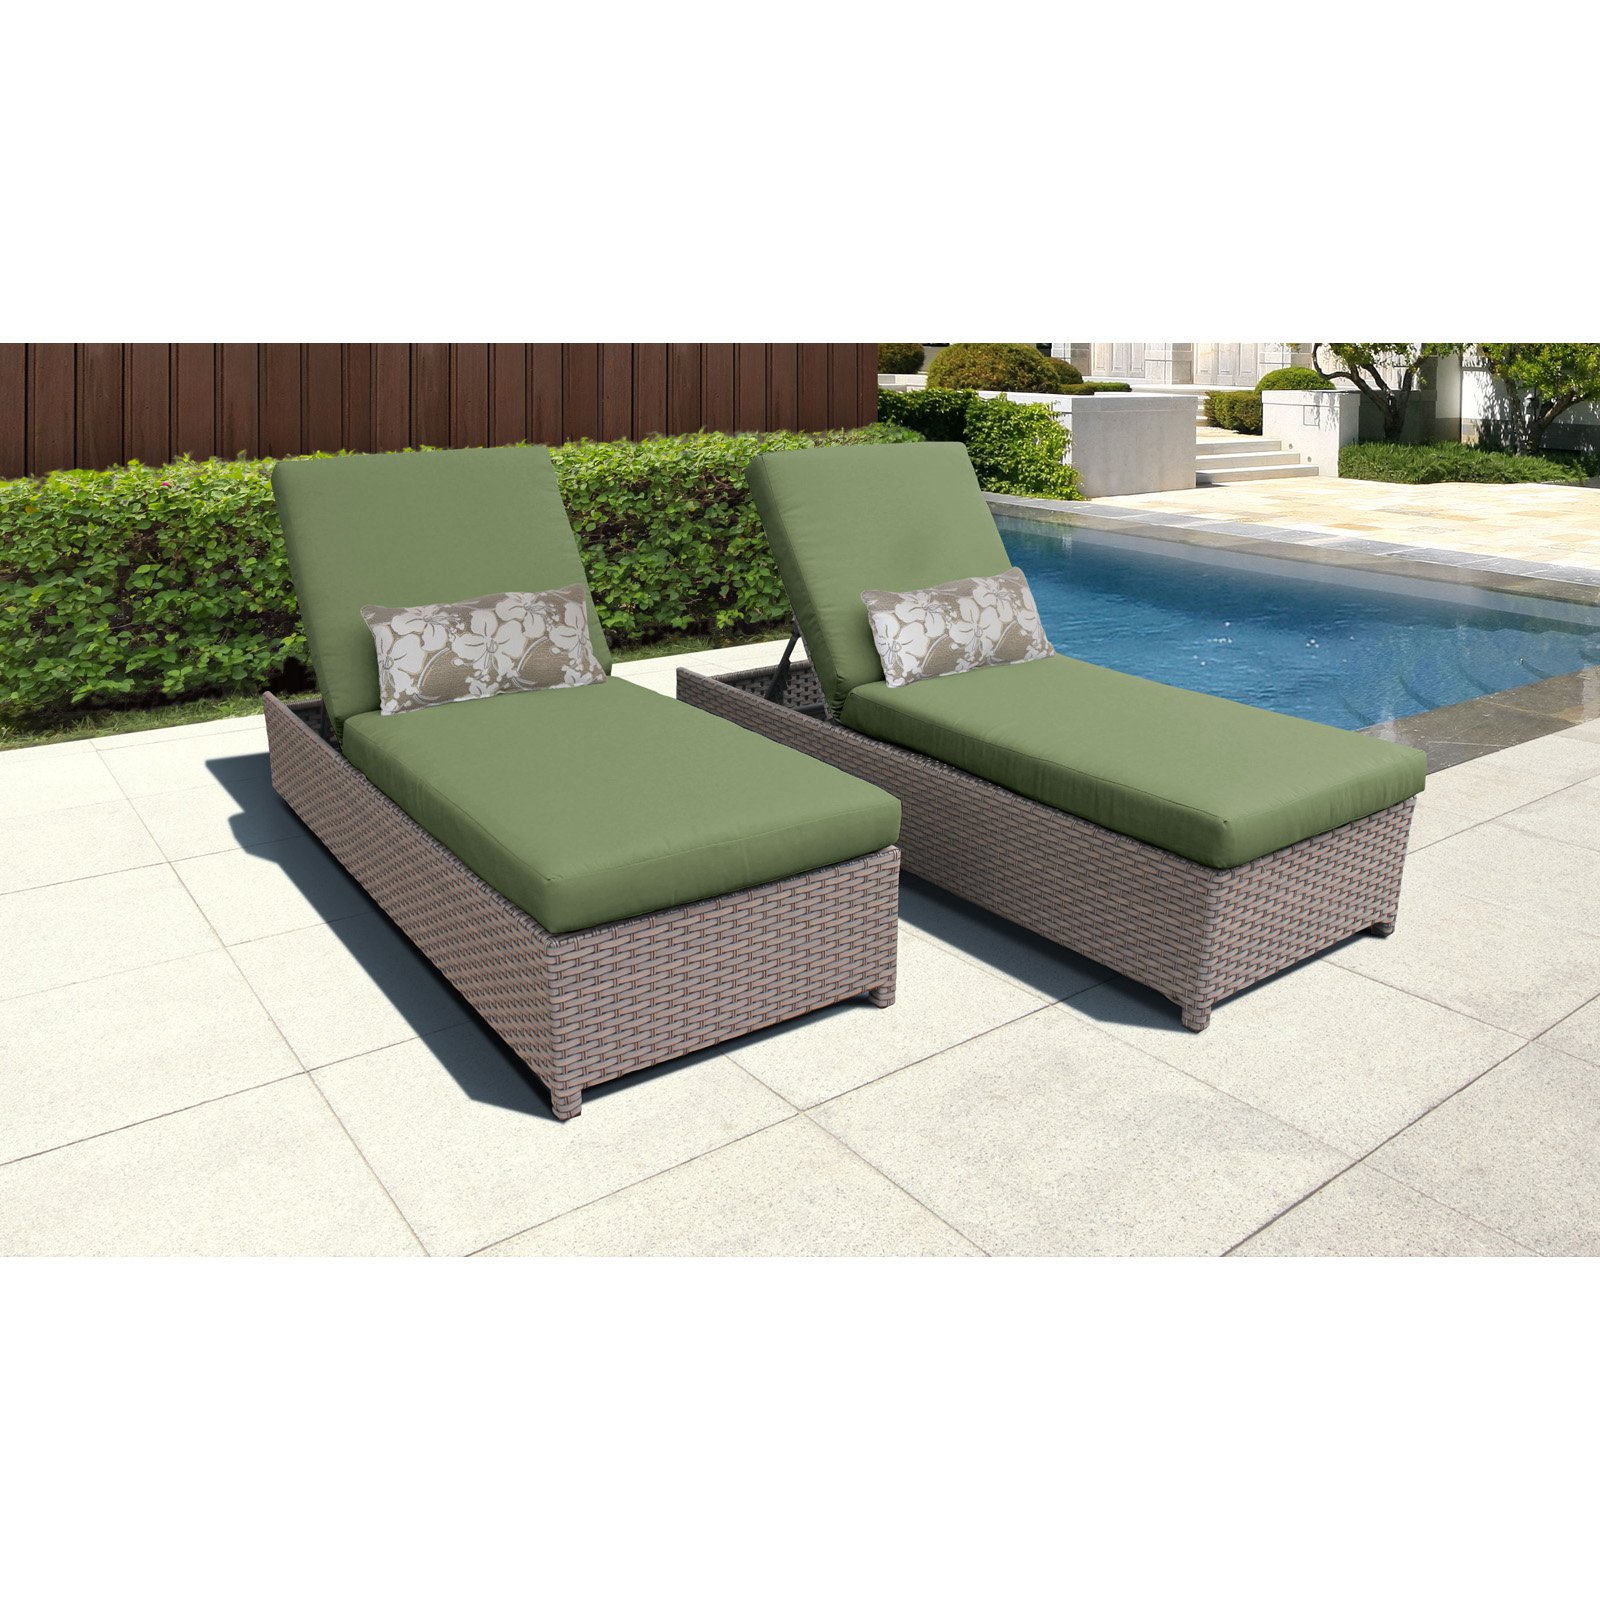 TK Classics Monterey Wheeled Wicker Outdoor Chaise Lounge Chair - Set of 2 - image 4 of 11